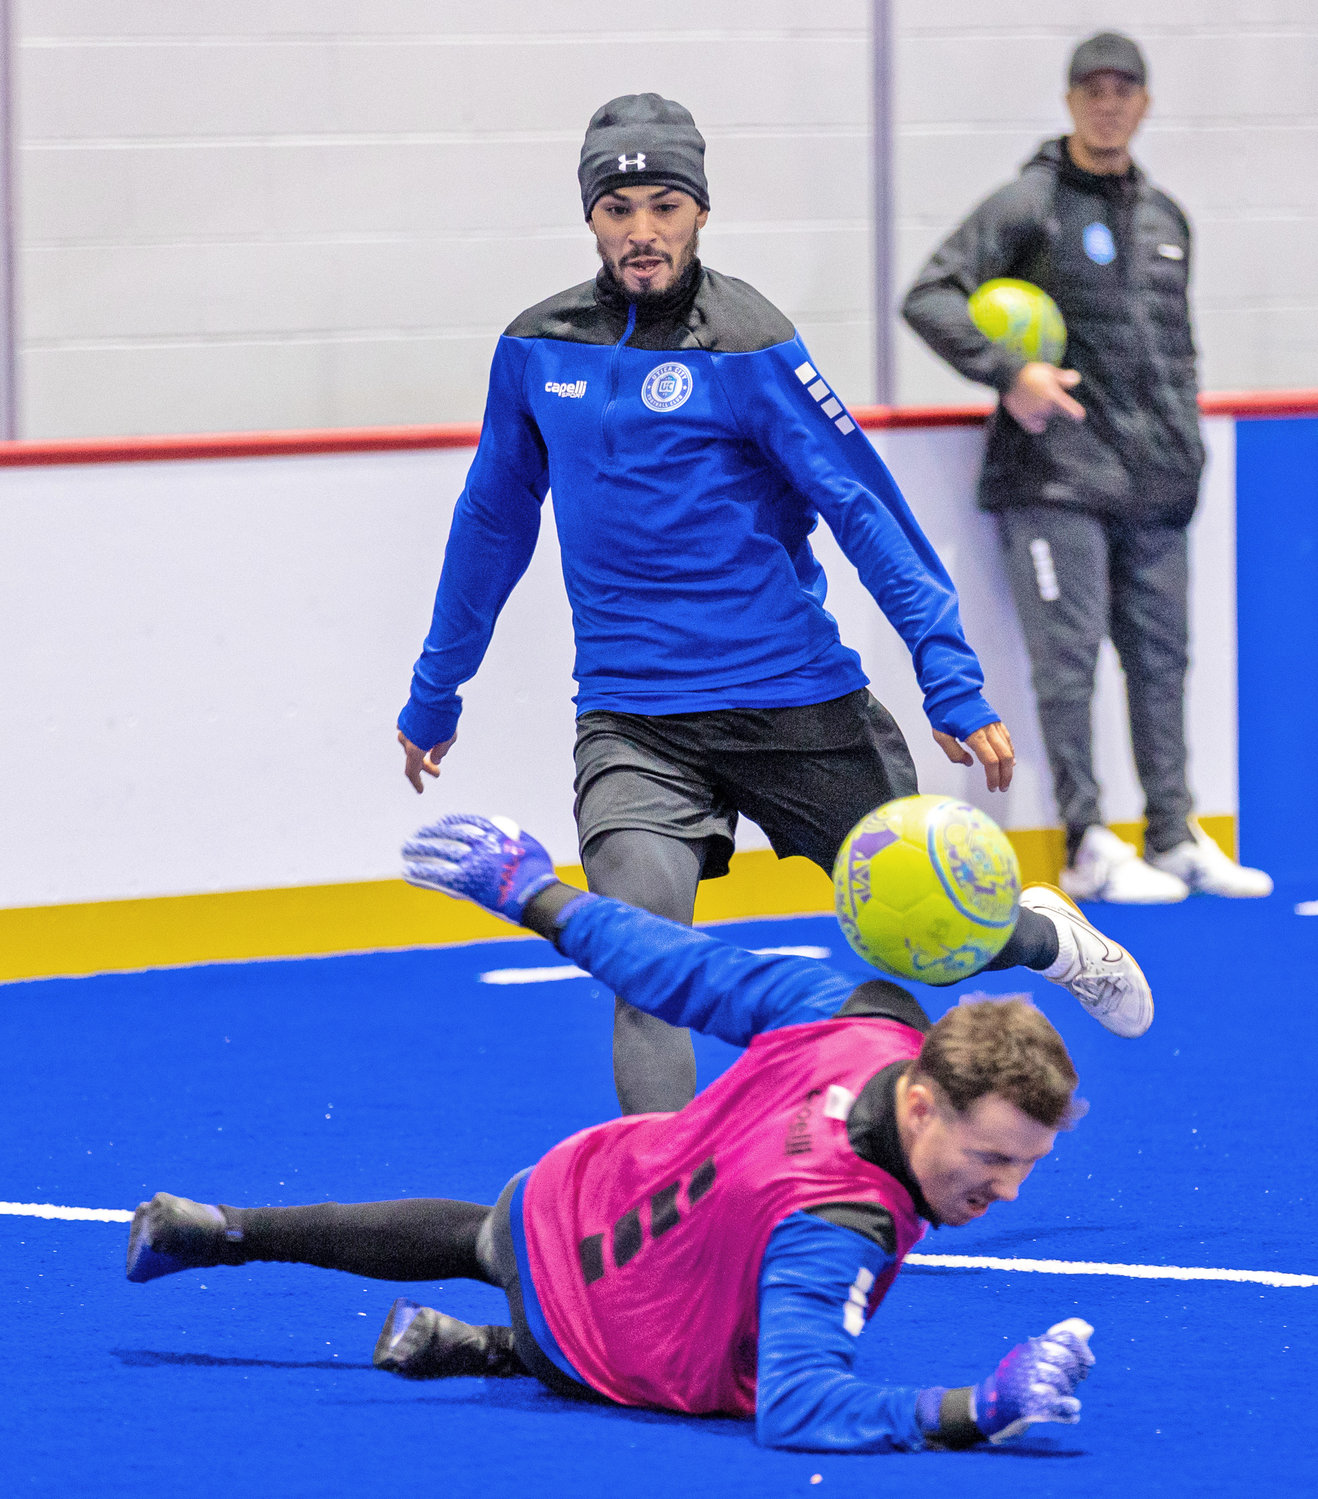 Forward Steven Fernandez watches as goalkeeper Brian Wilkin makes a save in practice for Utica City FC earlier this week. Looking on in the background is Hewerton Moreira, the team's new head coach.